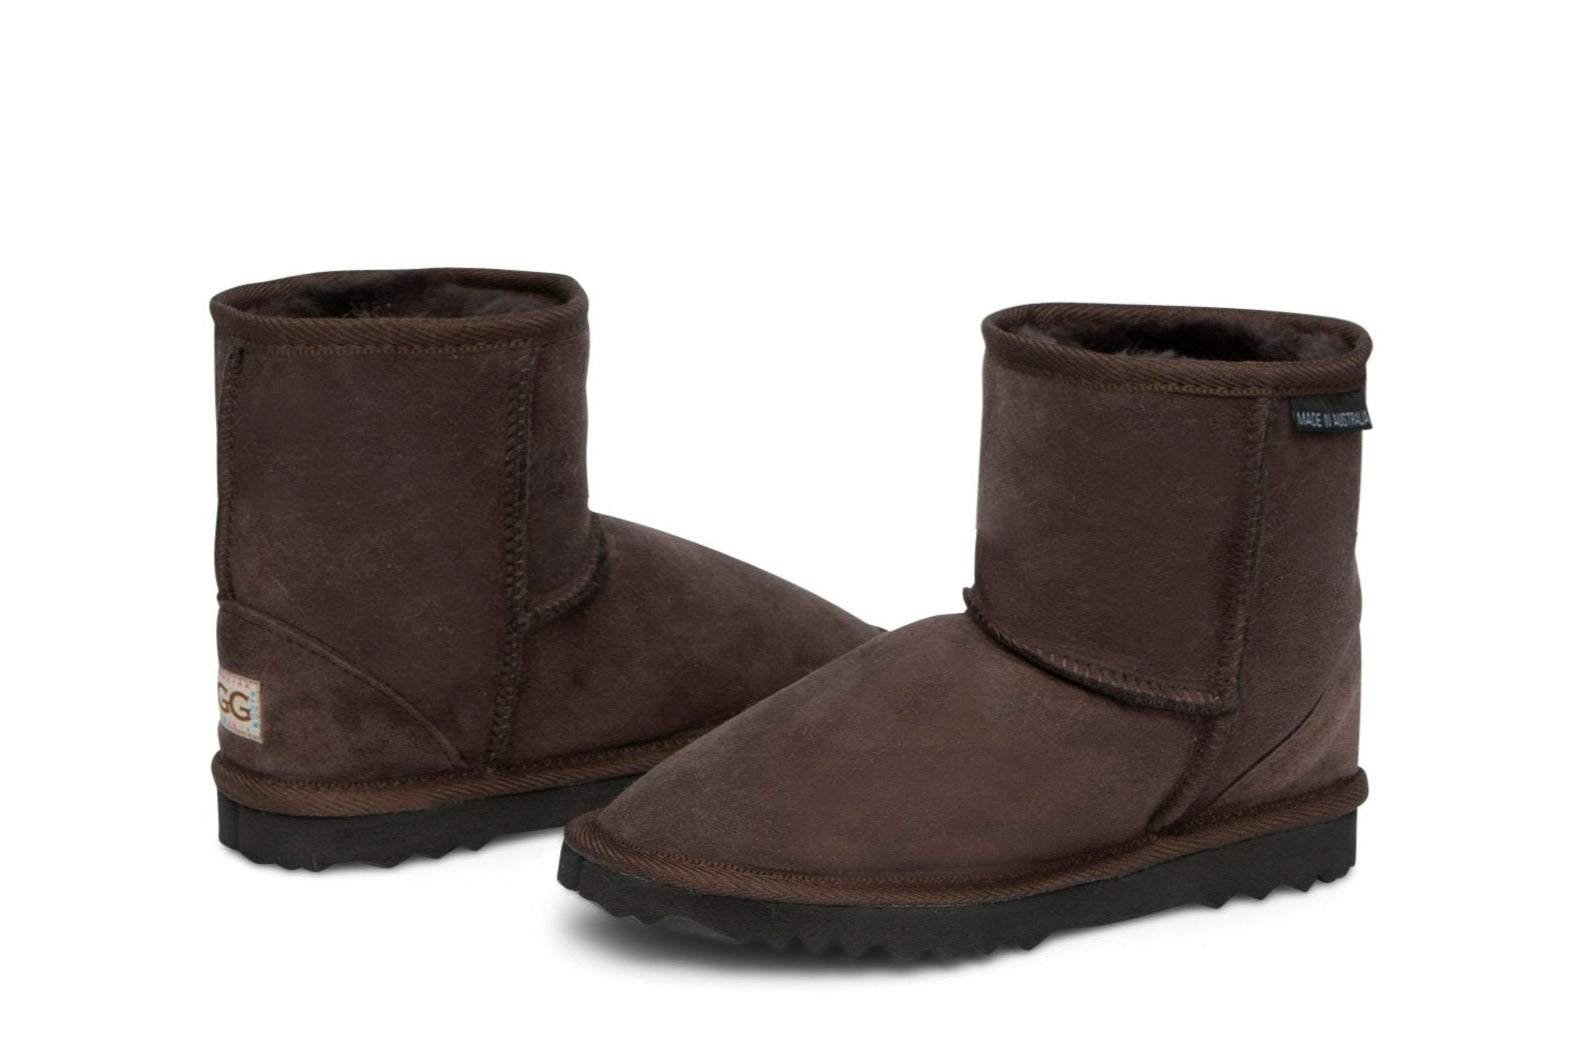 Kid's ultra short boots in chocolate colour